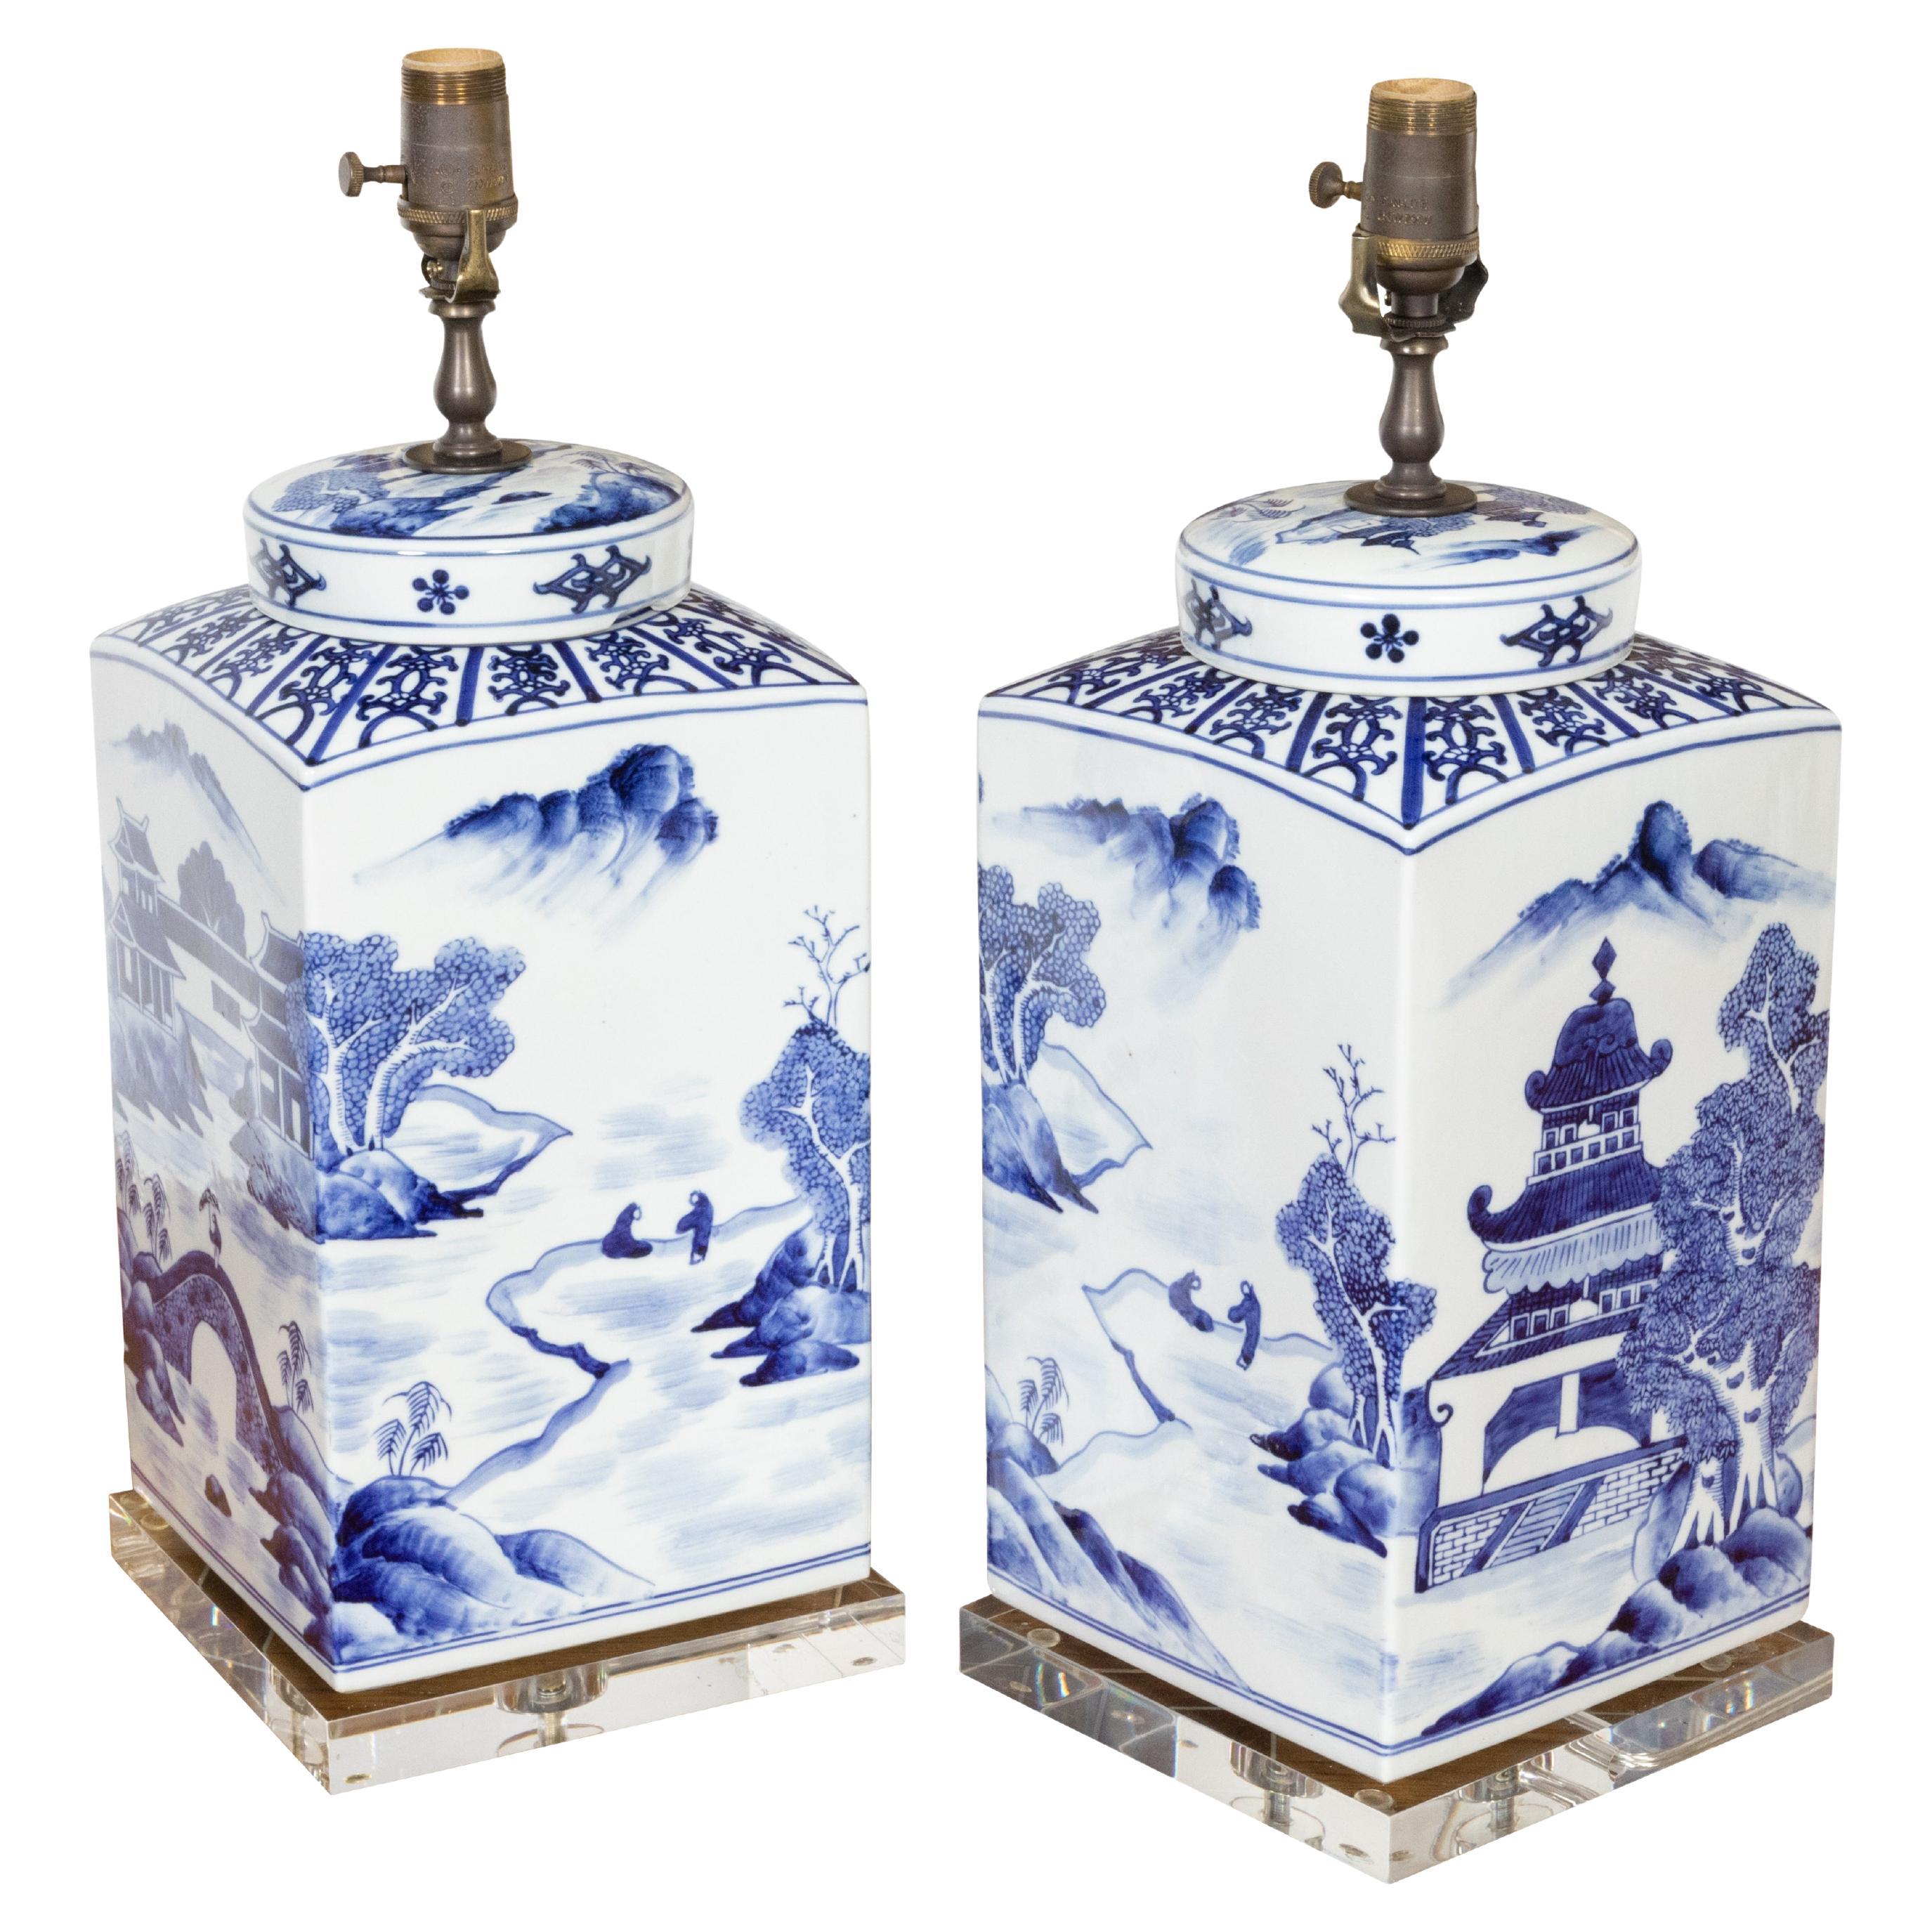 Chinese Export Blue and White Porcelain Jars Made into Wired Table Lamps